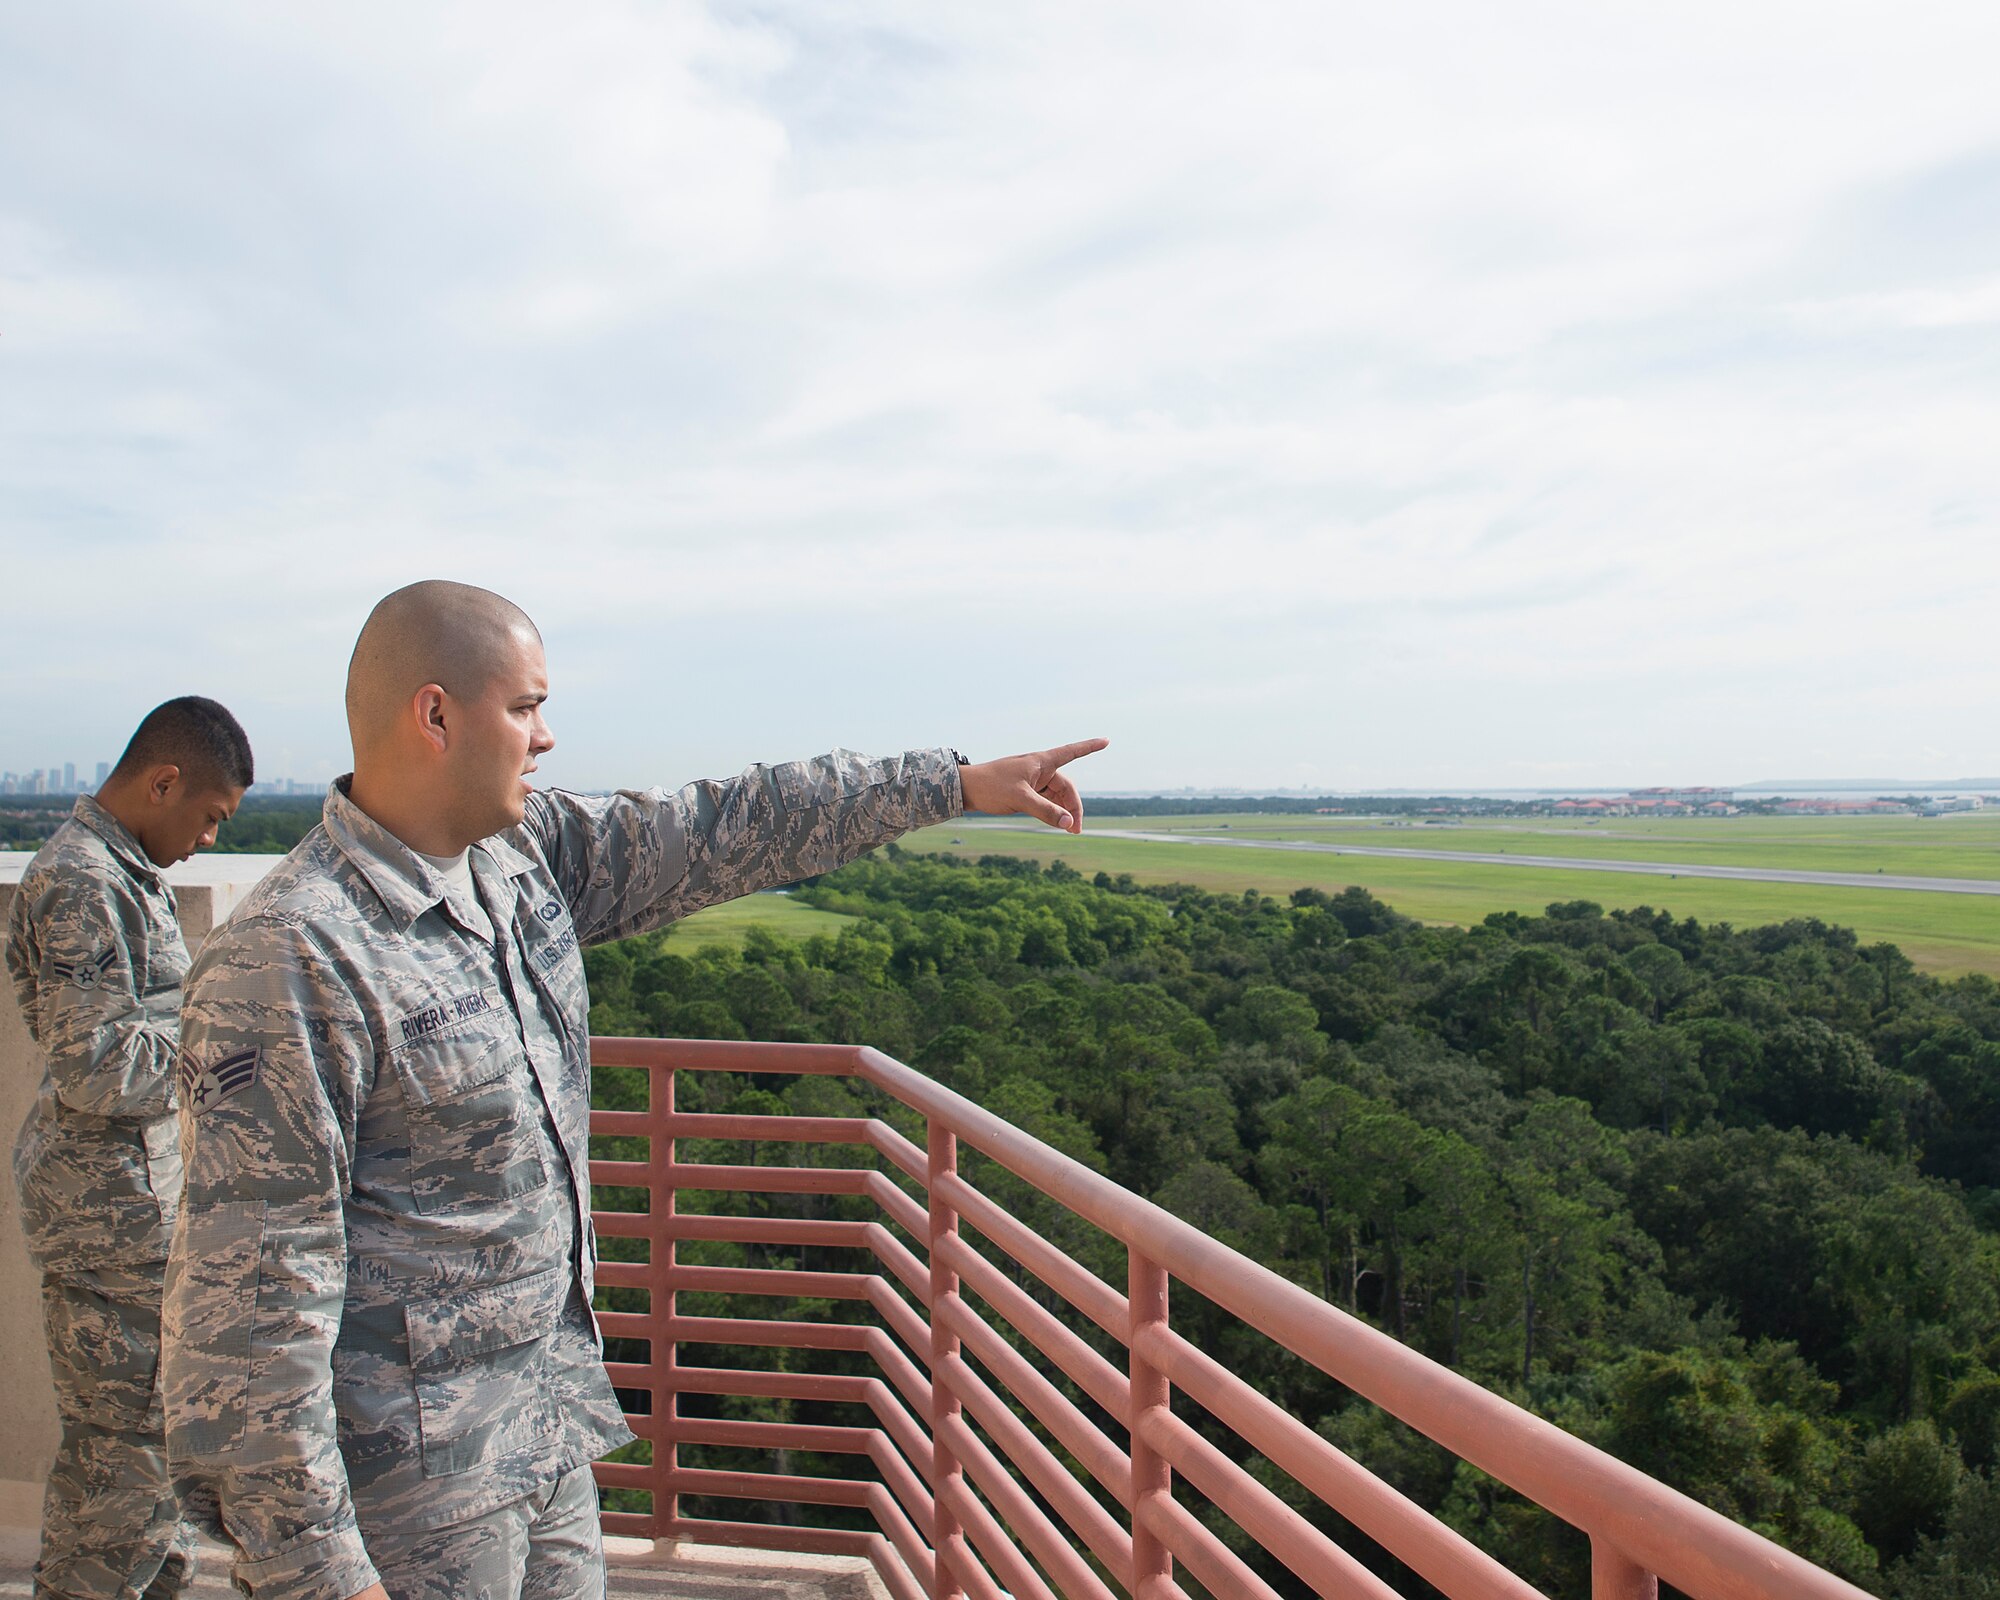 U.S. Air Force Senior Airman Daryl Rivera-Rivera, air traffic control journeyman assigned to the 6th Operation Support Squadron, and Airman 1st Class Julian Hurrey, air traffic control apprentice assigned to the 6th OSS, examine the flightline at MacDill Air Force Base, Florida, Oct. 1, 2018.